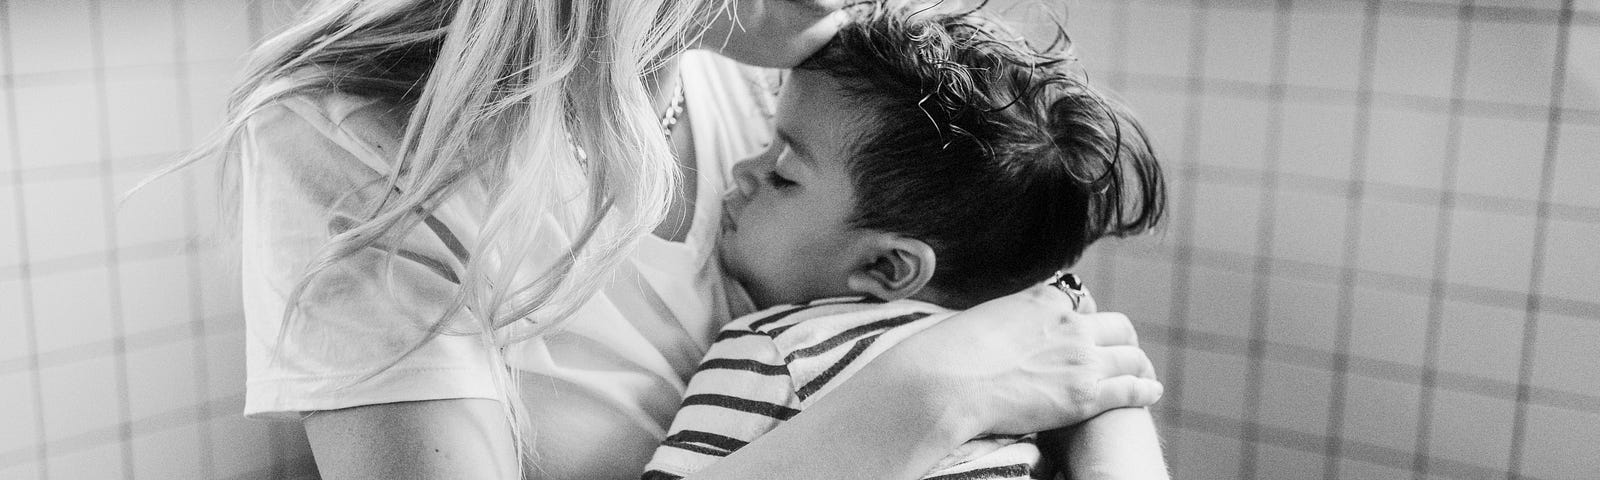 Black and white photo of a mother with long blond hair cradling a sleeping toddler boy in her lap, with his head against her shoulder.